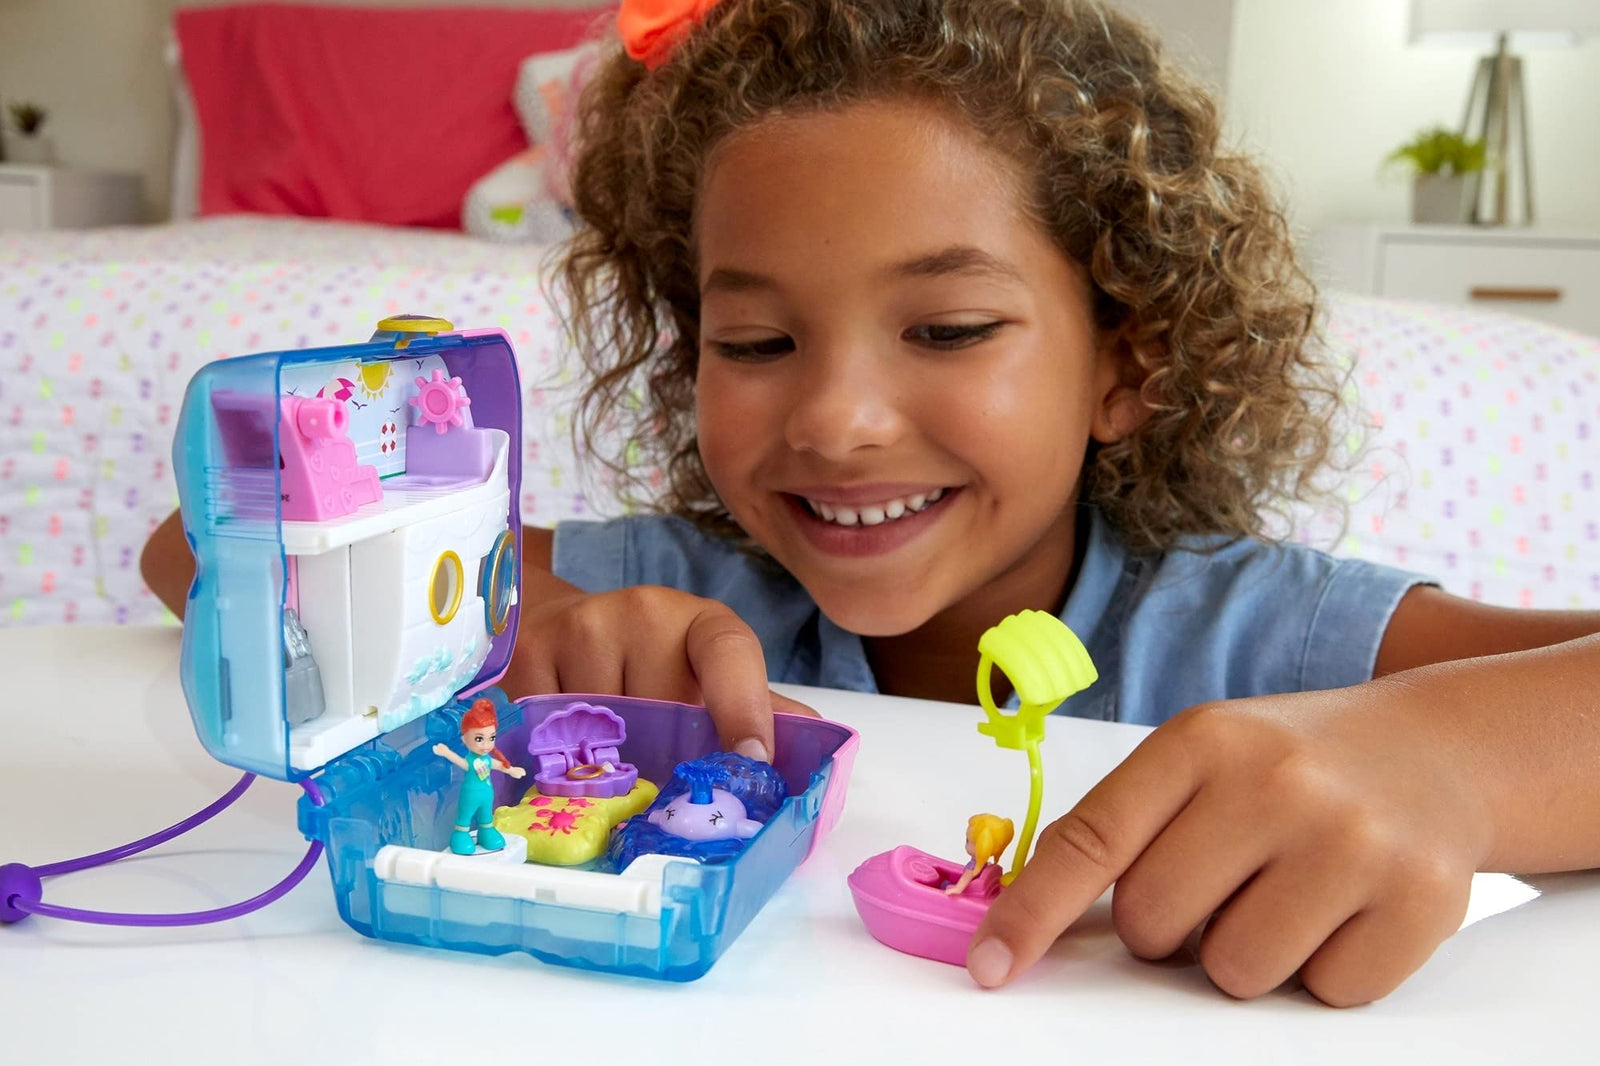 Polly Pocket Pocket World Sweet Sails Cruise Ship Compact with Fun Reveals, Micro Polly and Lila Dolls and Jet Ski Accessory, for Ages 4 and Up [Amazon Exclusive]